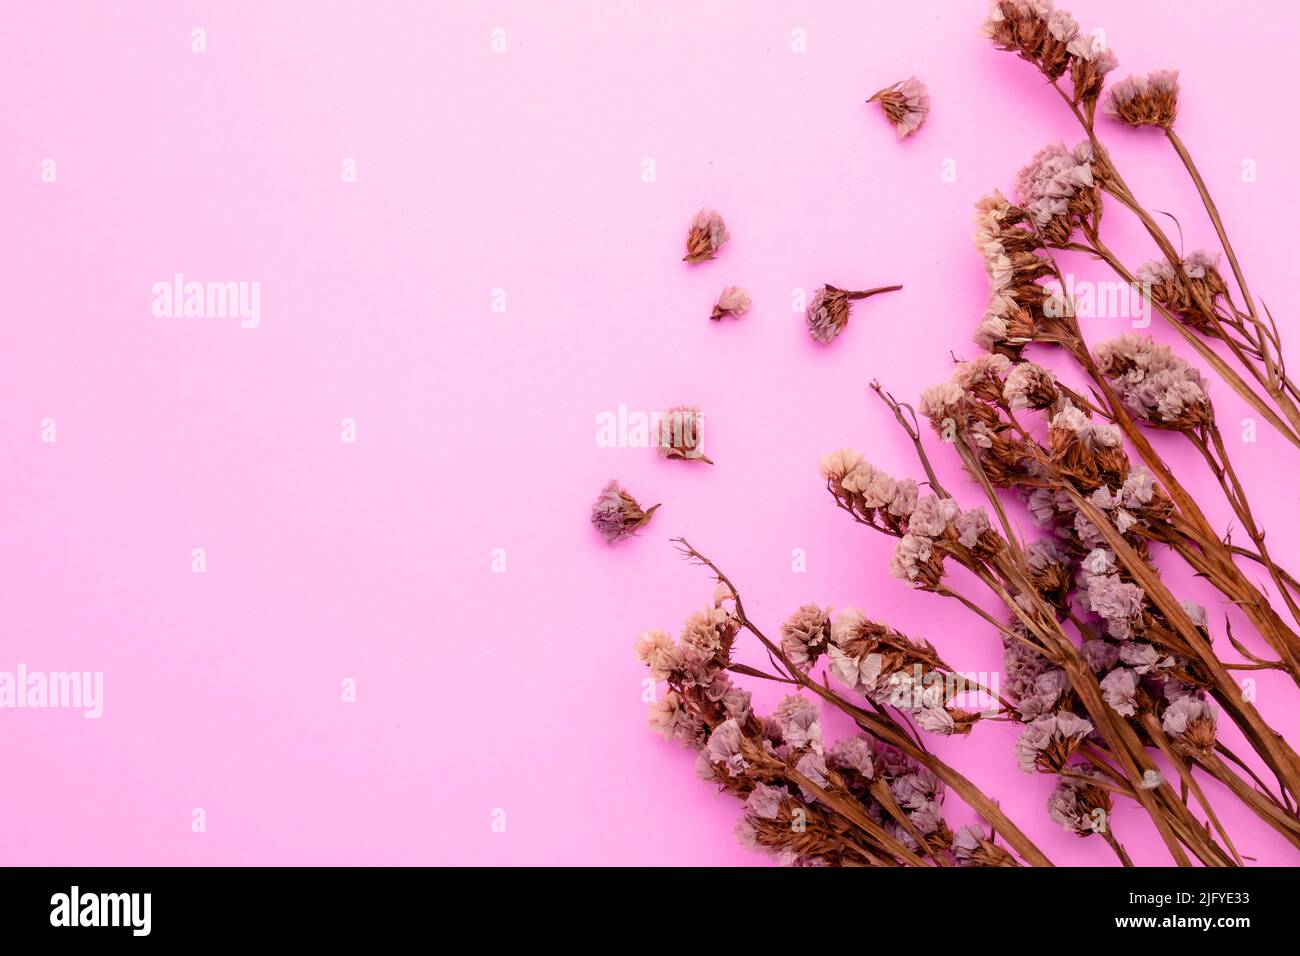 Top view dry color grass flower for interior decoration on pink background. Studio shot with copy space for test or design Stock Photo